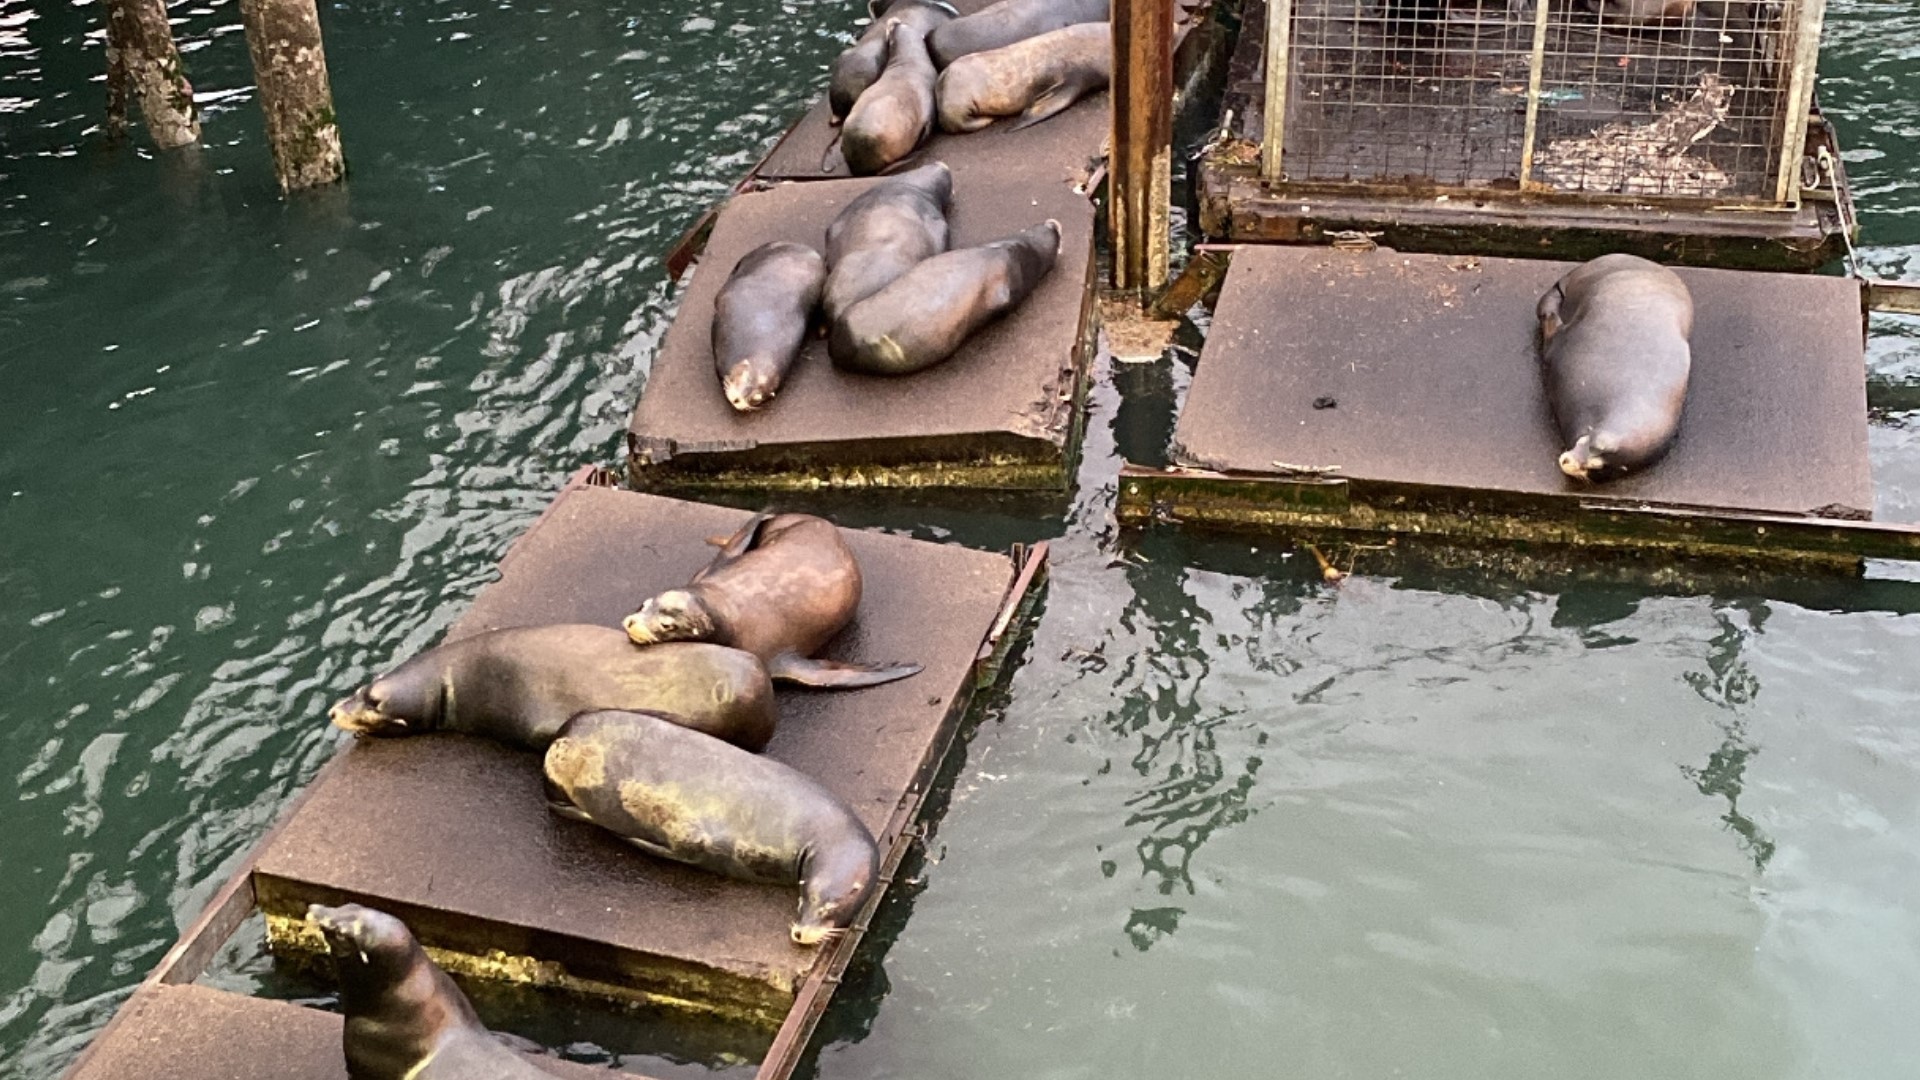 Business owners in Newport are raising money to fix the popular Sea Lion docks that were destroyed in a winter storm last month